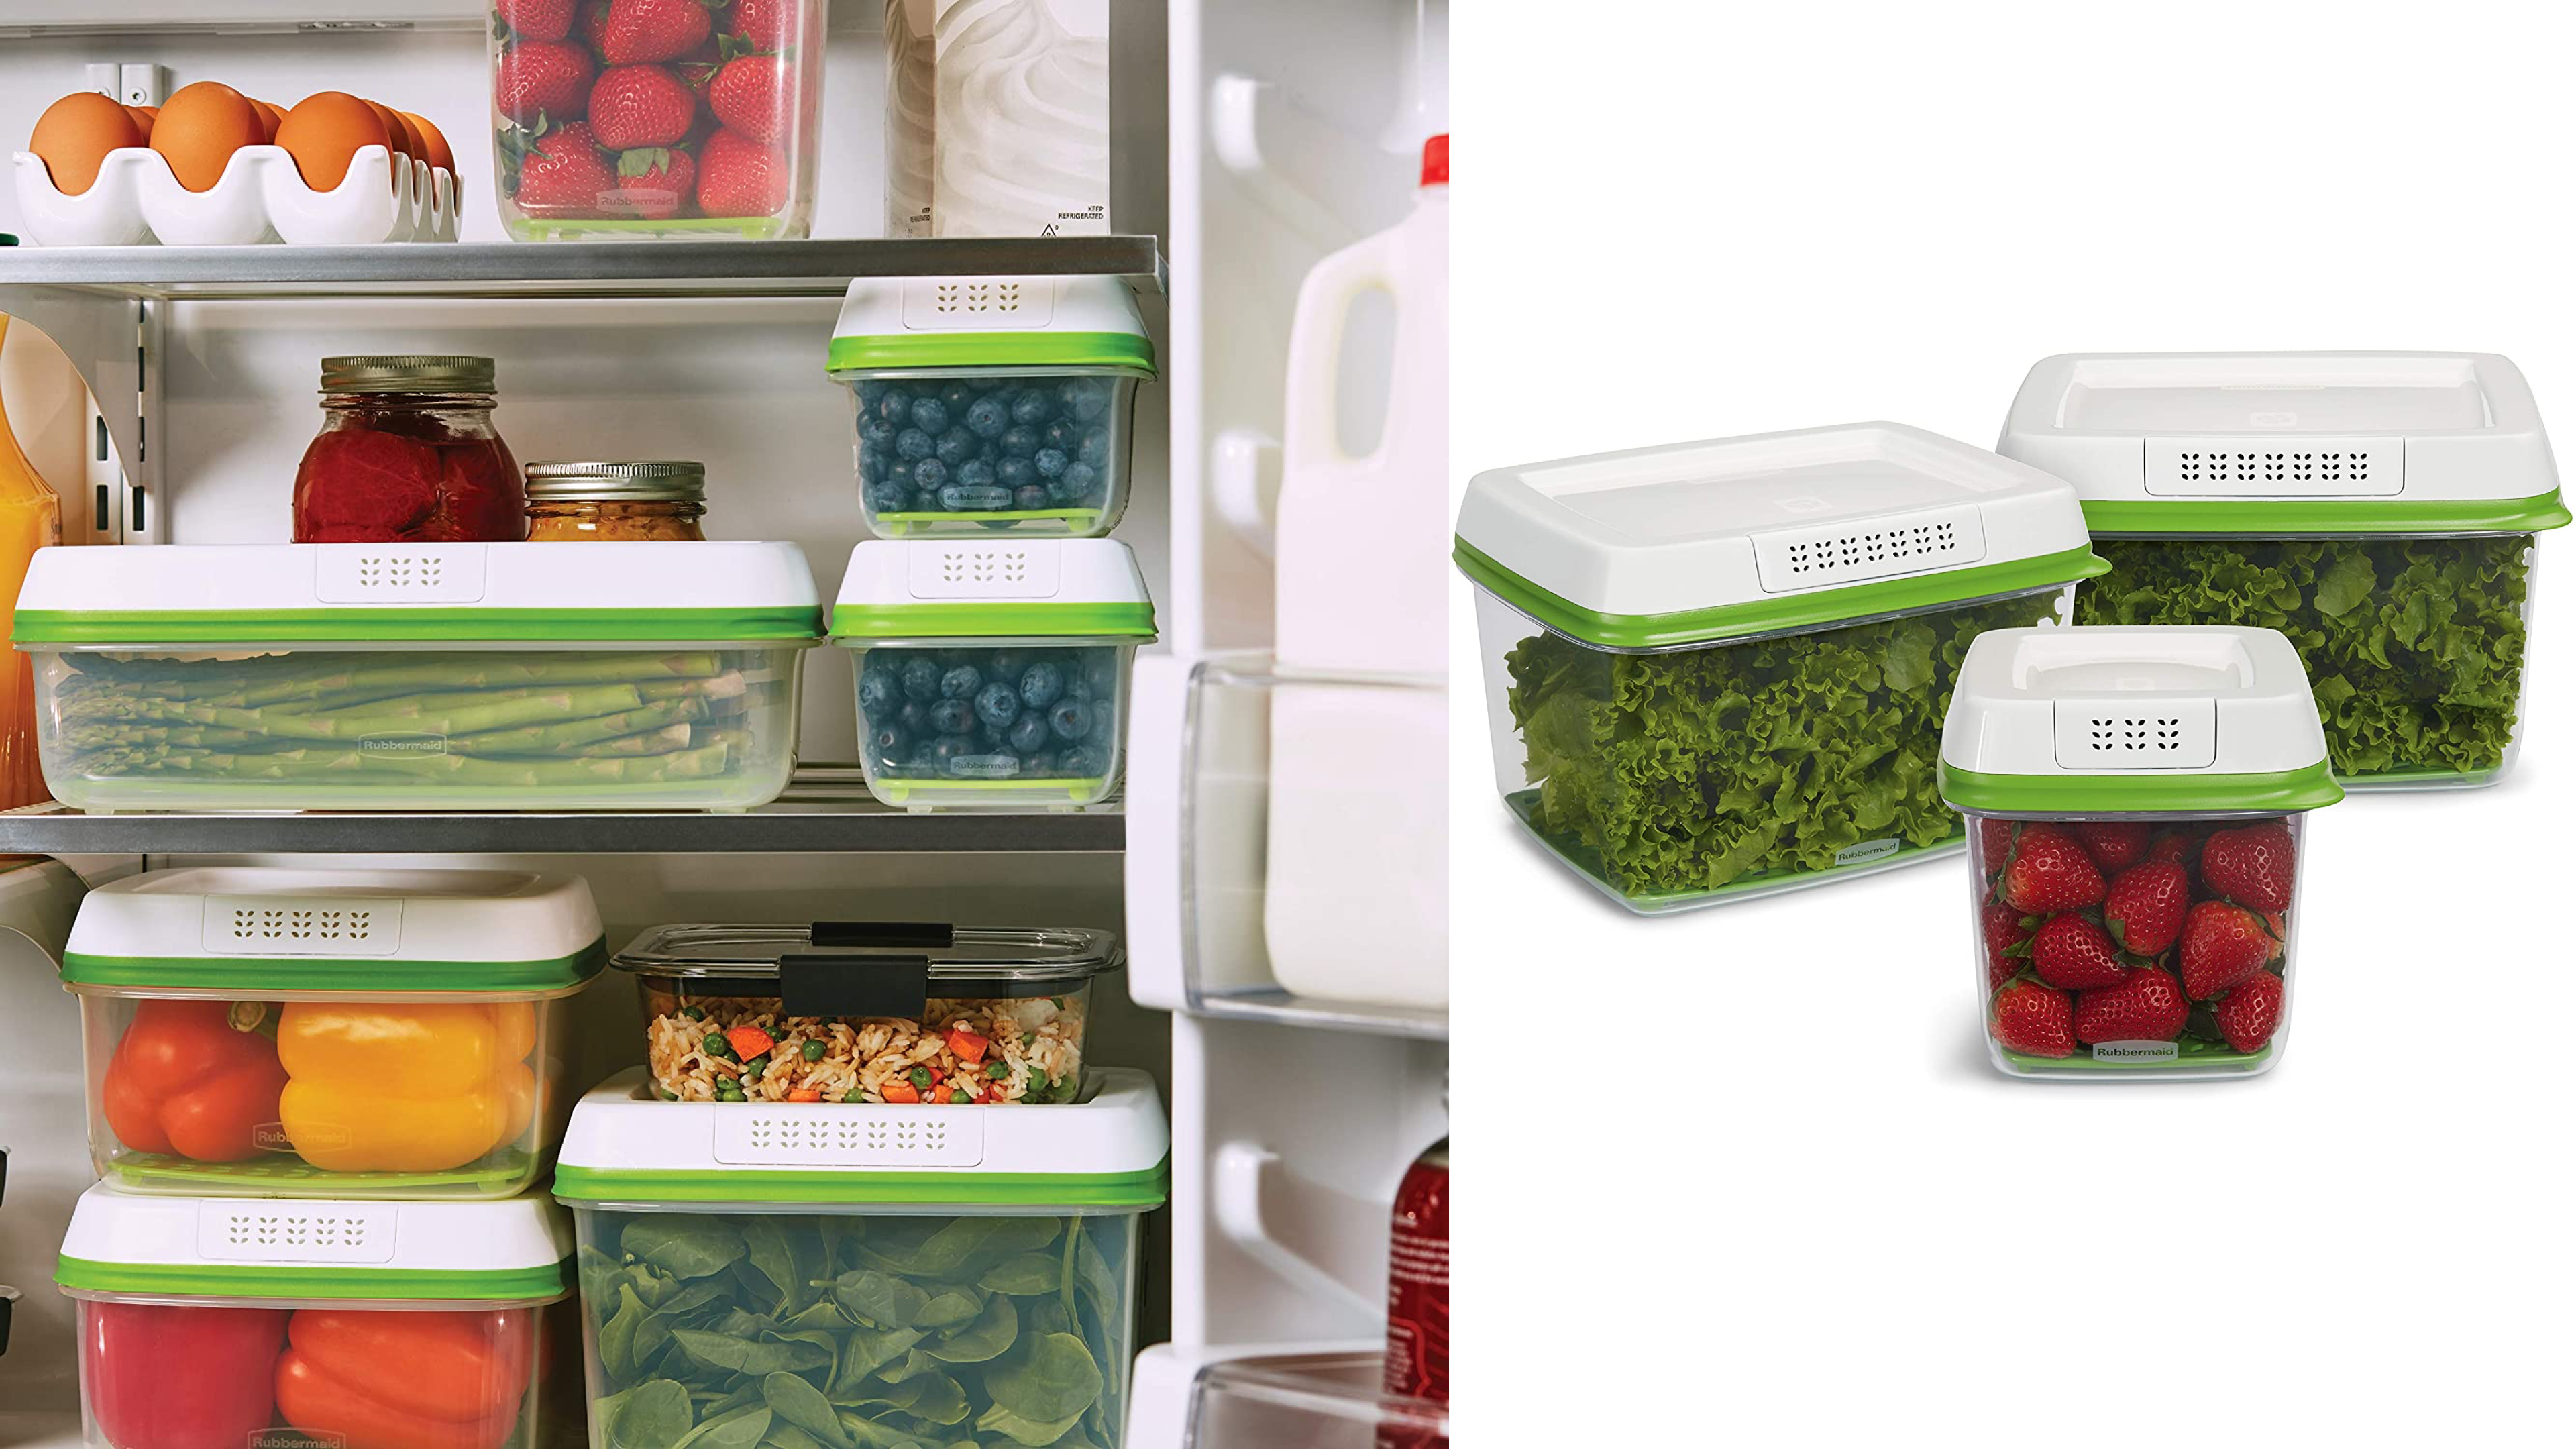 produce containers that are ventilated and can keep your fruits and veggies fresh for longer